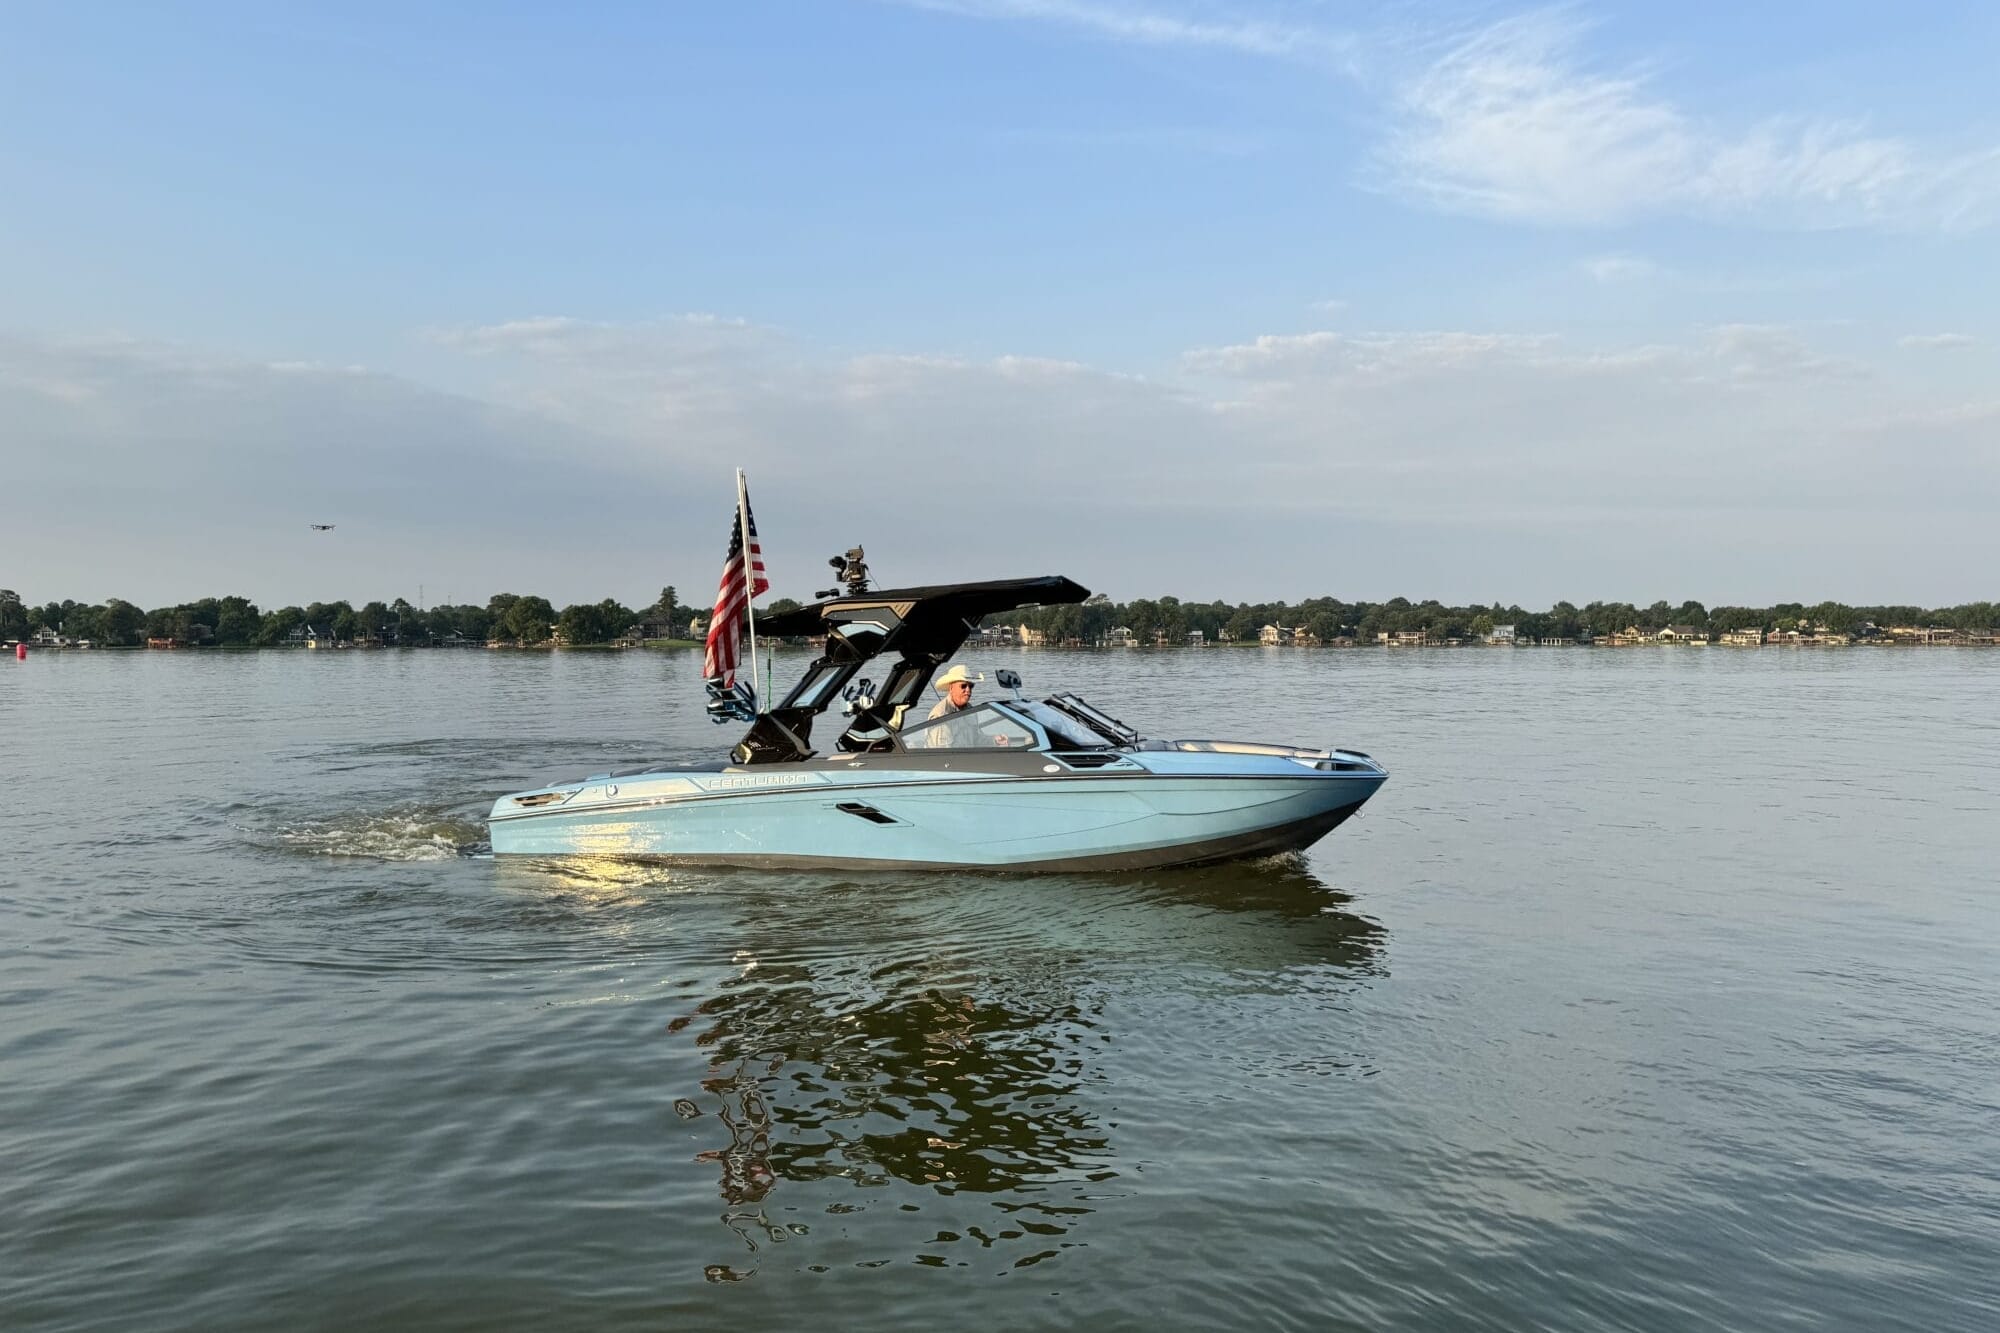 A light blue motorboat with an American flag is moving on a calm lake under a clear sky with some clouds. Trees and houses are visible on the distant shoreline.